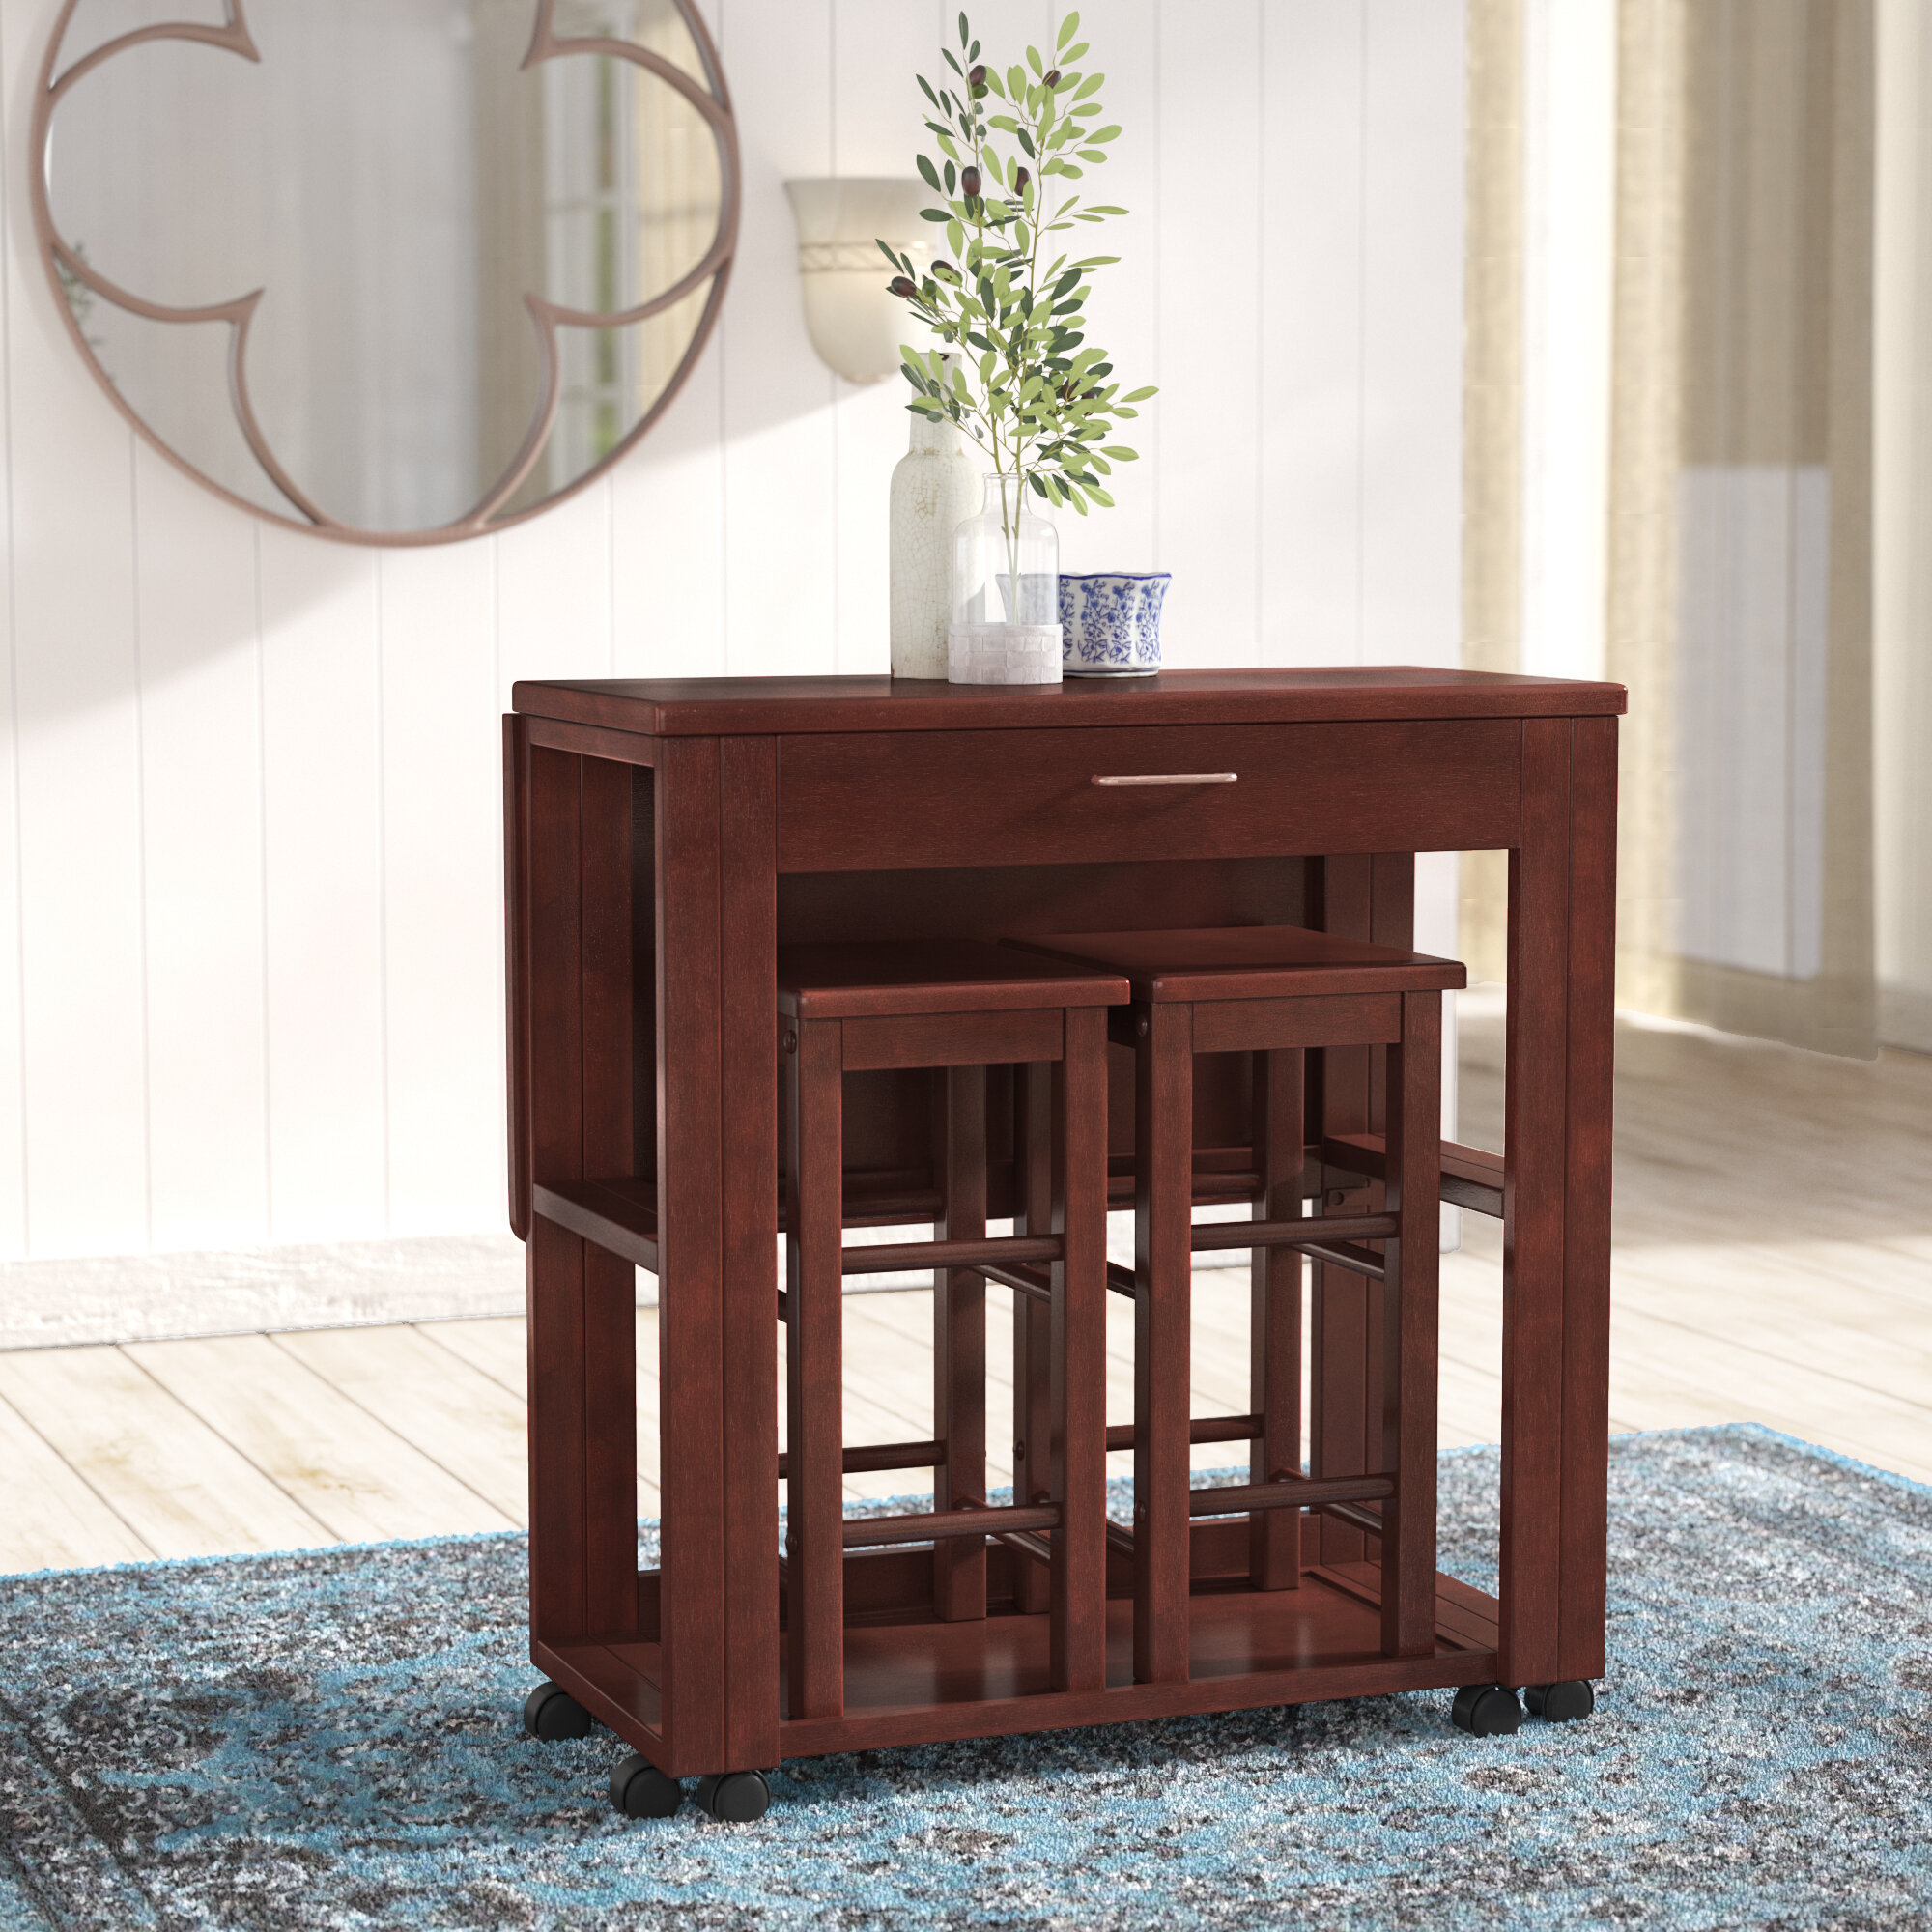 Wood Bar Table And Chairs  : Woodanville Counter Height Dining Table And Bar Stools (Set Of 5).